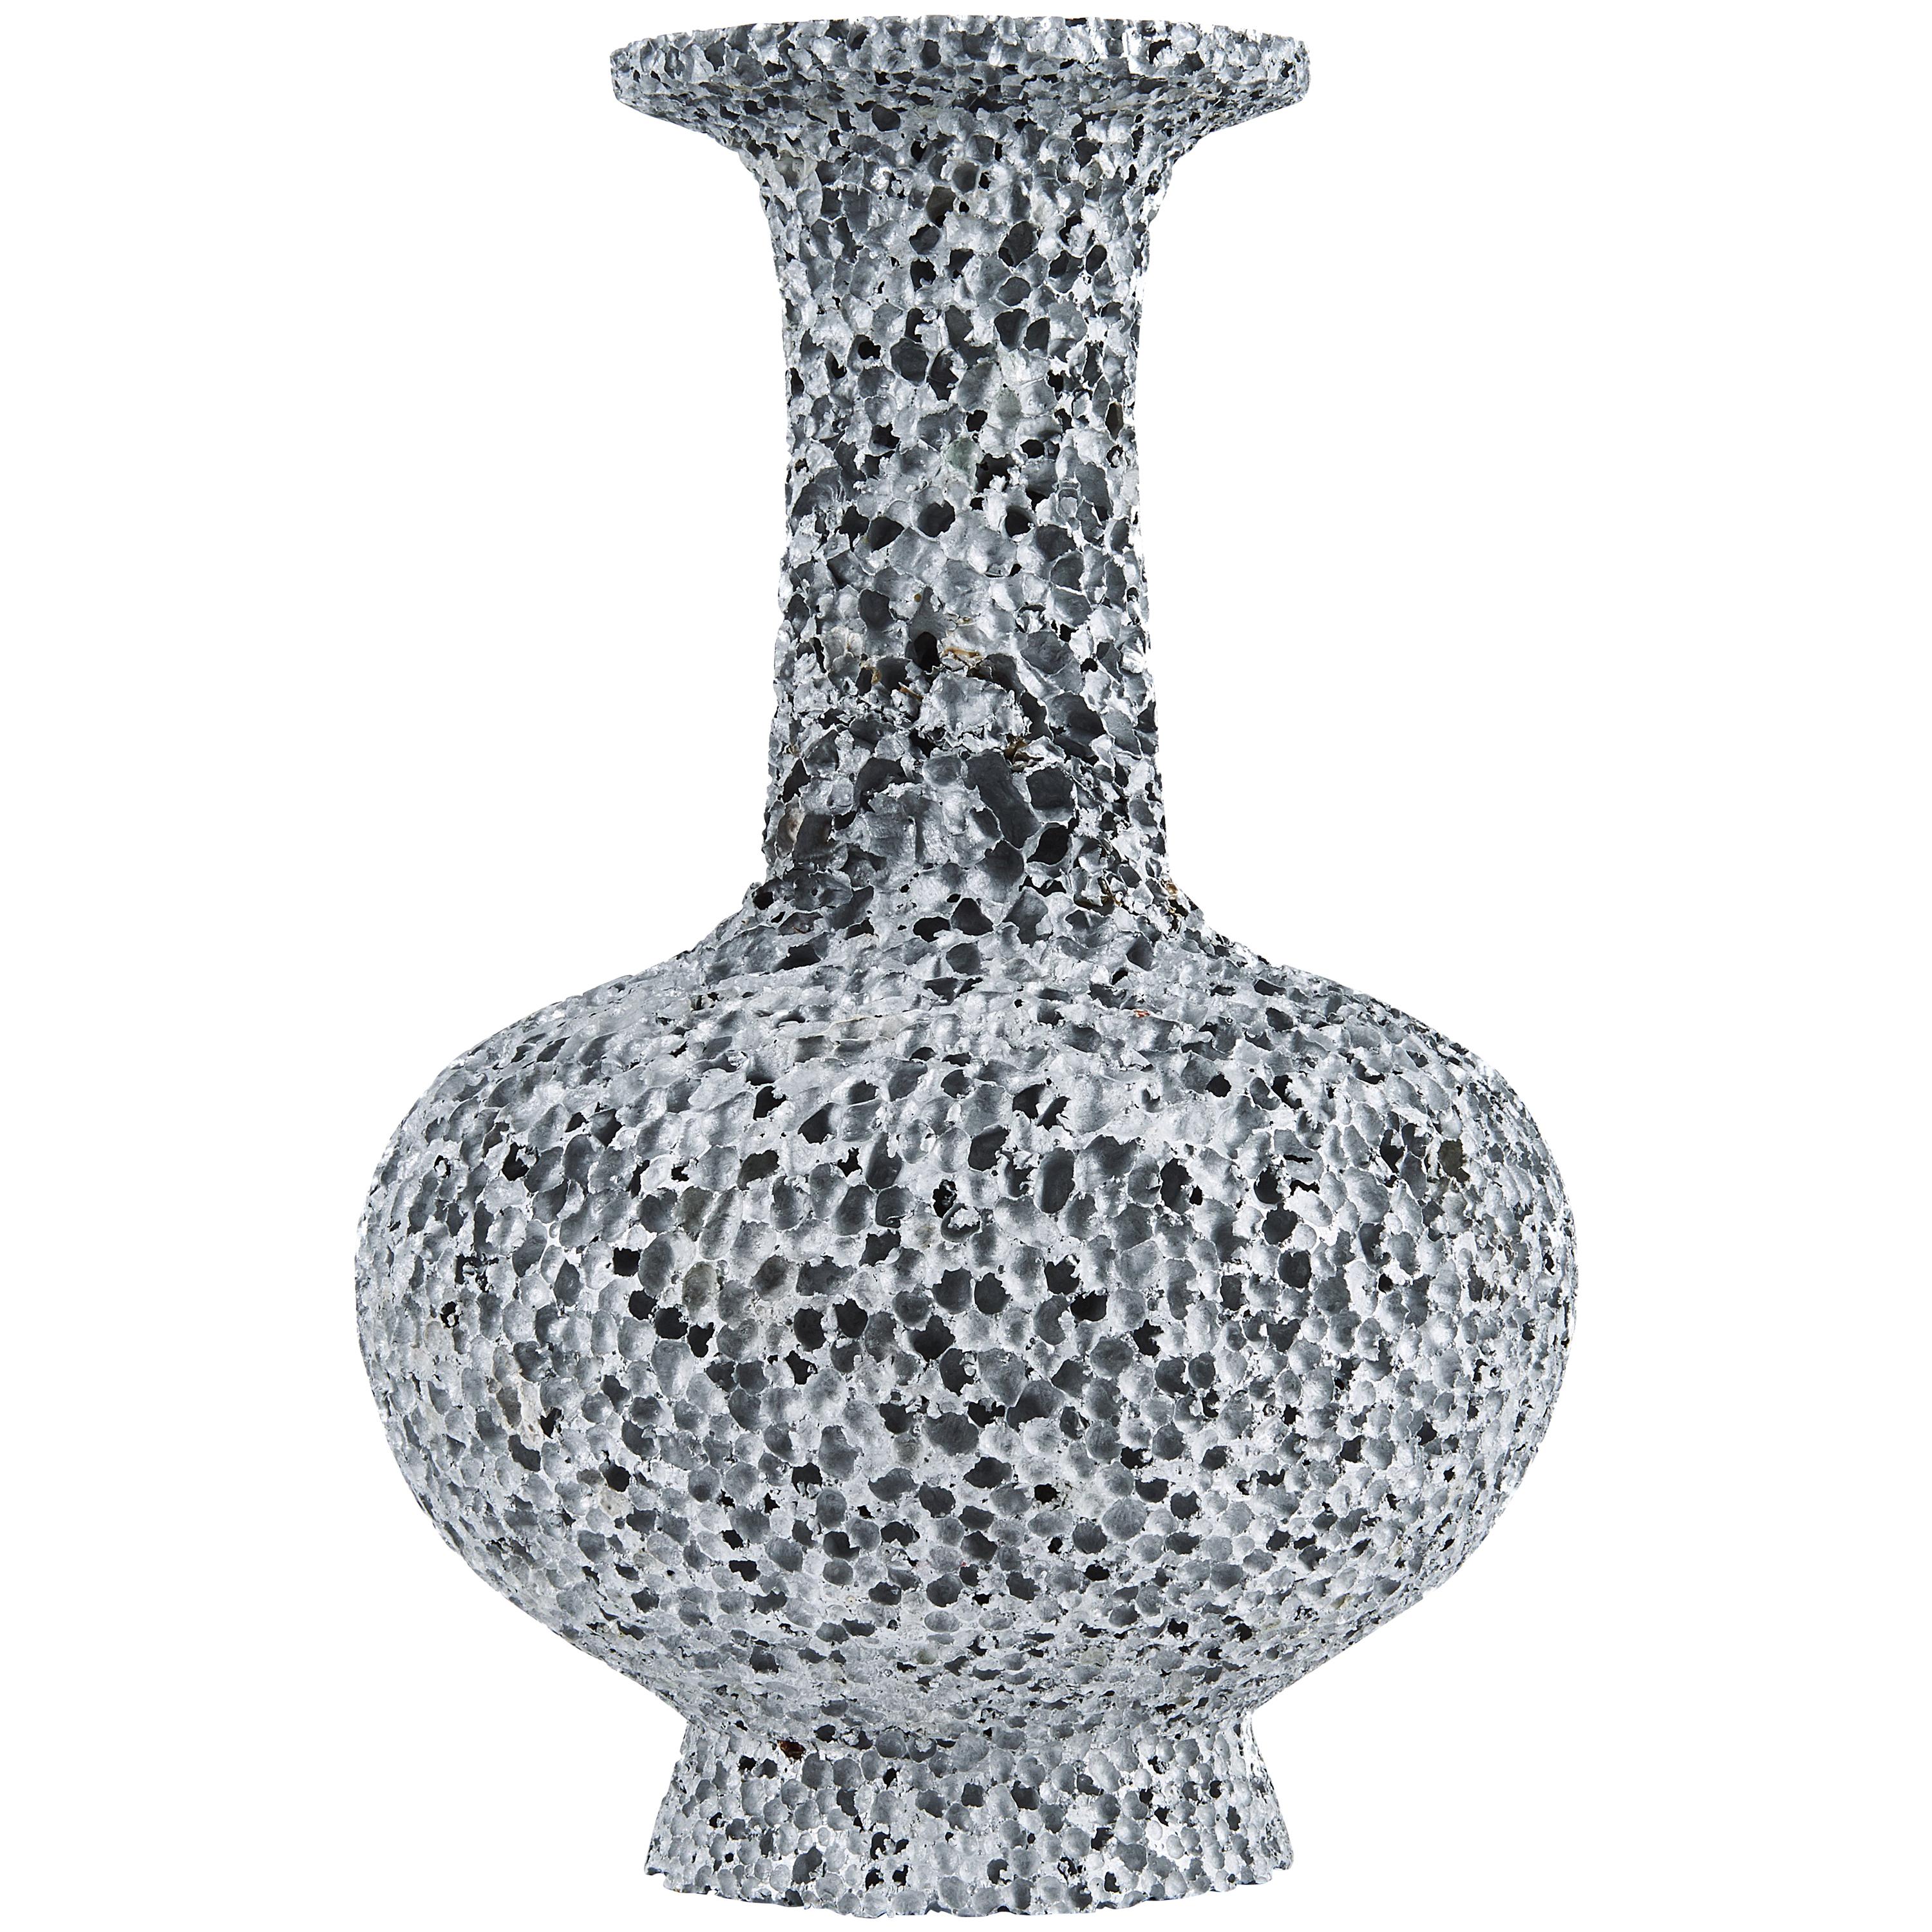 Dynasty Vase #1 - Metal Colored Aluminum Foam by Michael Young